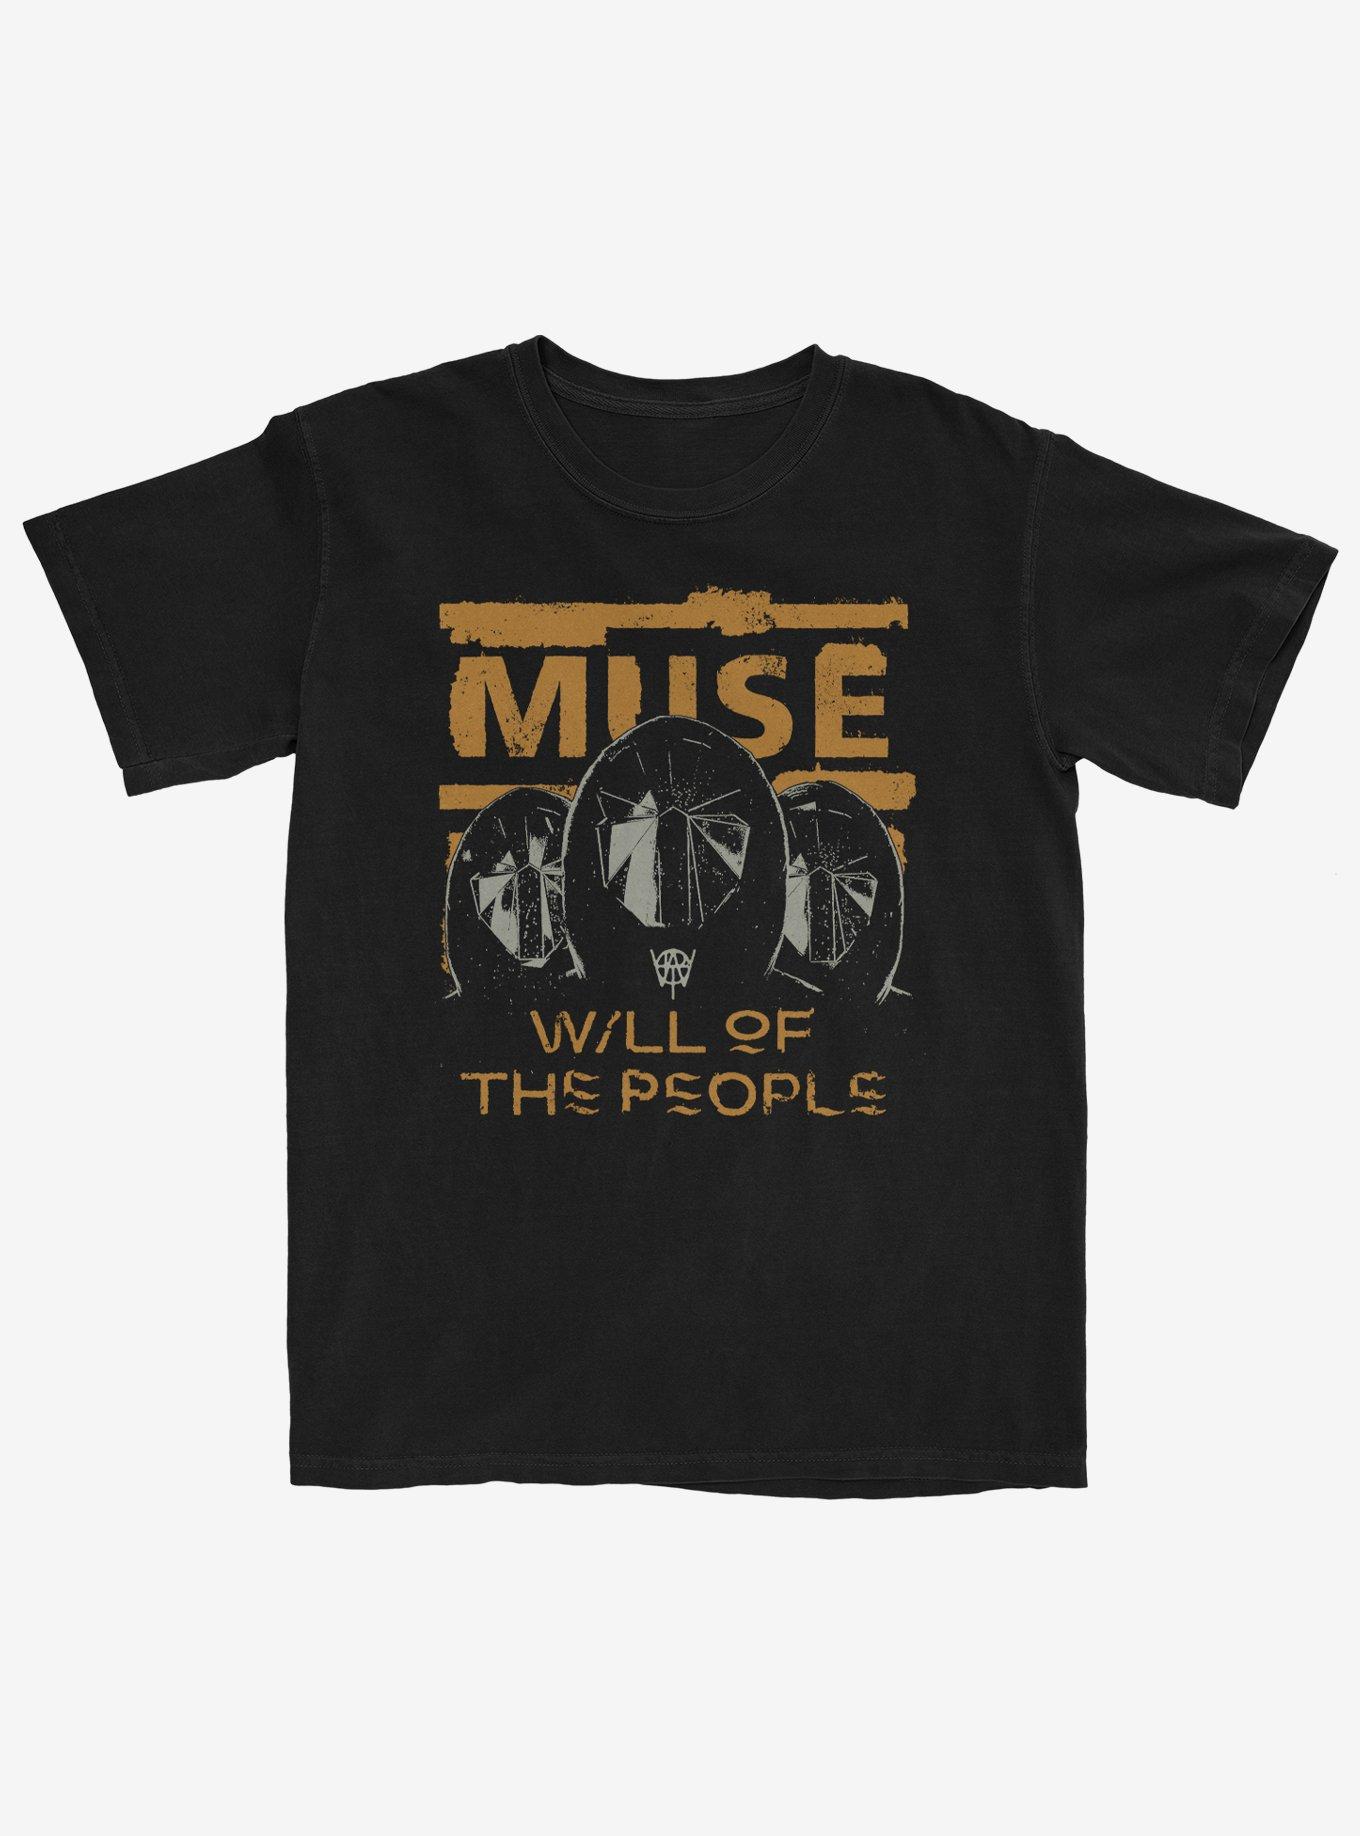 Muse Will Of The People Boyfriend Fit Girls T-Shirt